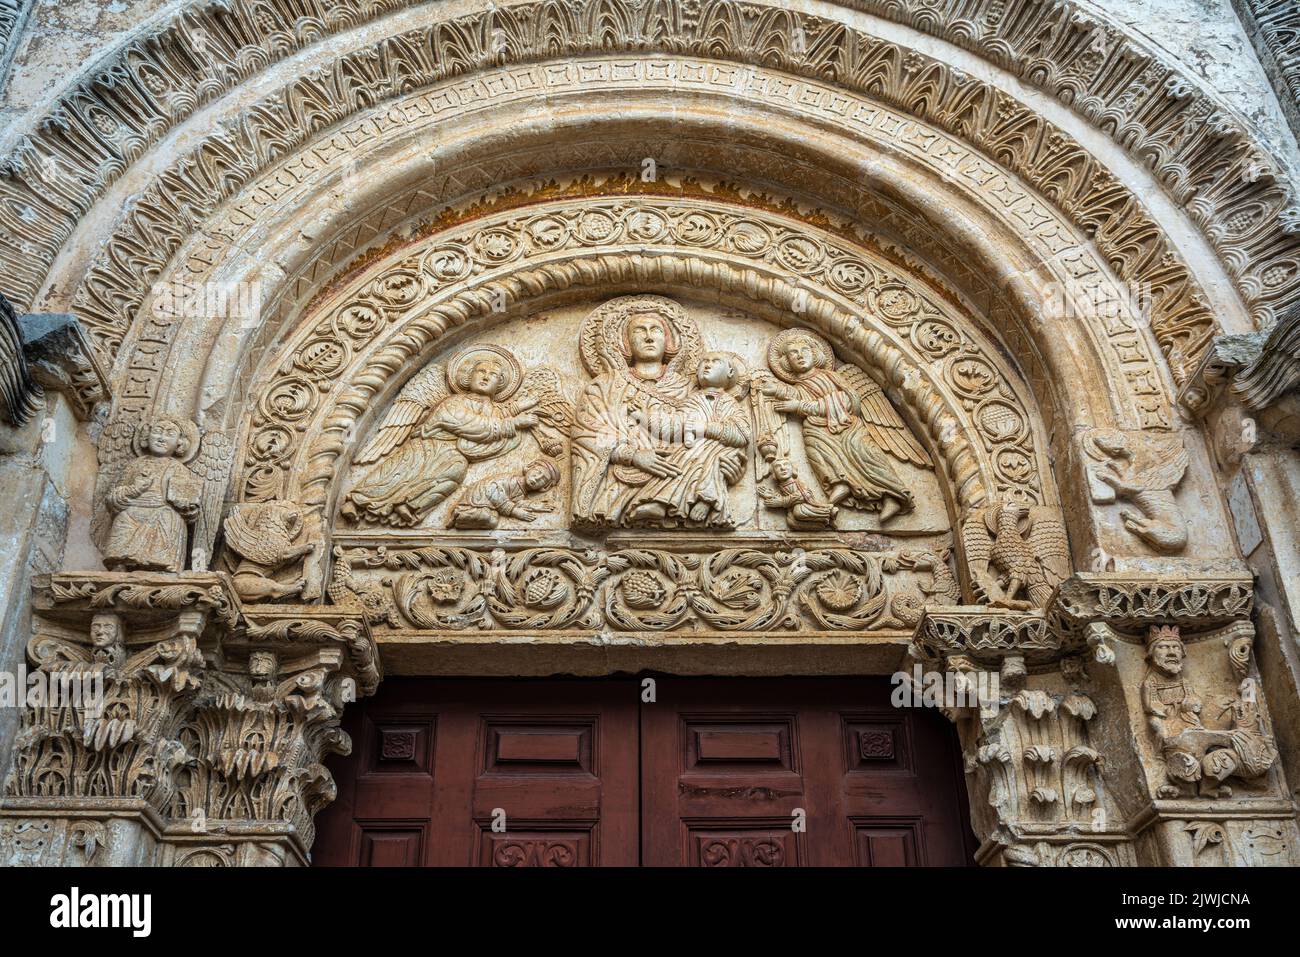 Lunette of the portal of Santa Maria Maggiore with the madonna and Child on the throne and two angels and two adoring ones. Monte Sant'Angelo, Puglia Stock Photo